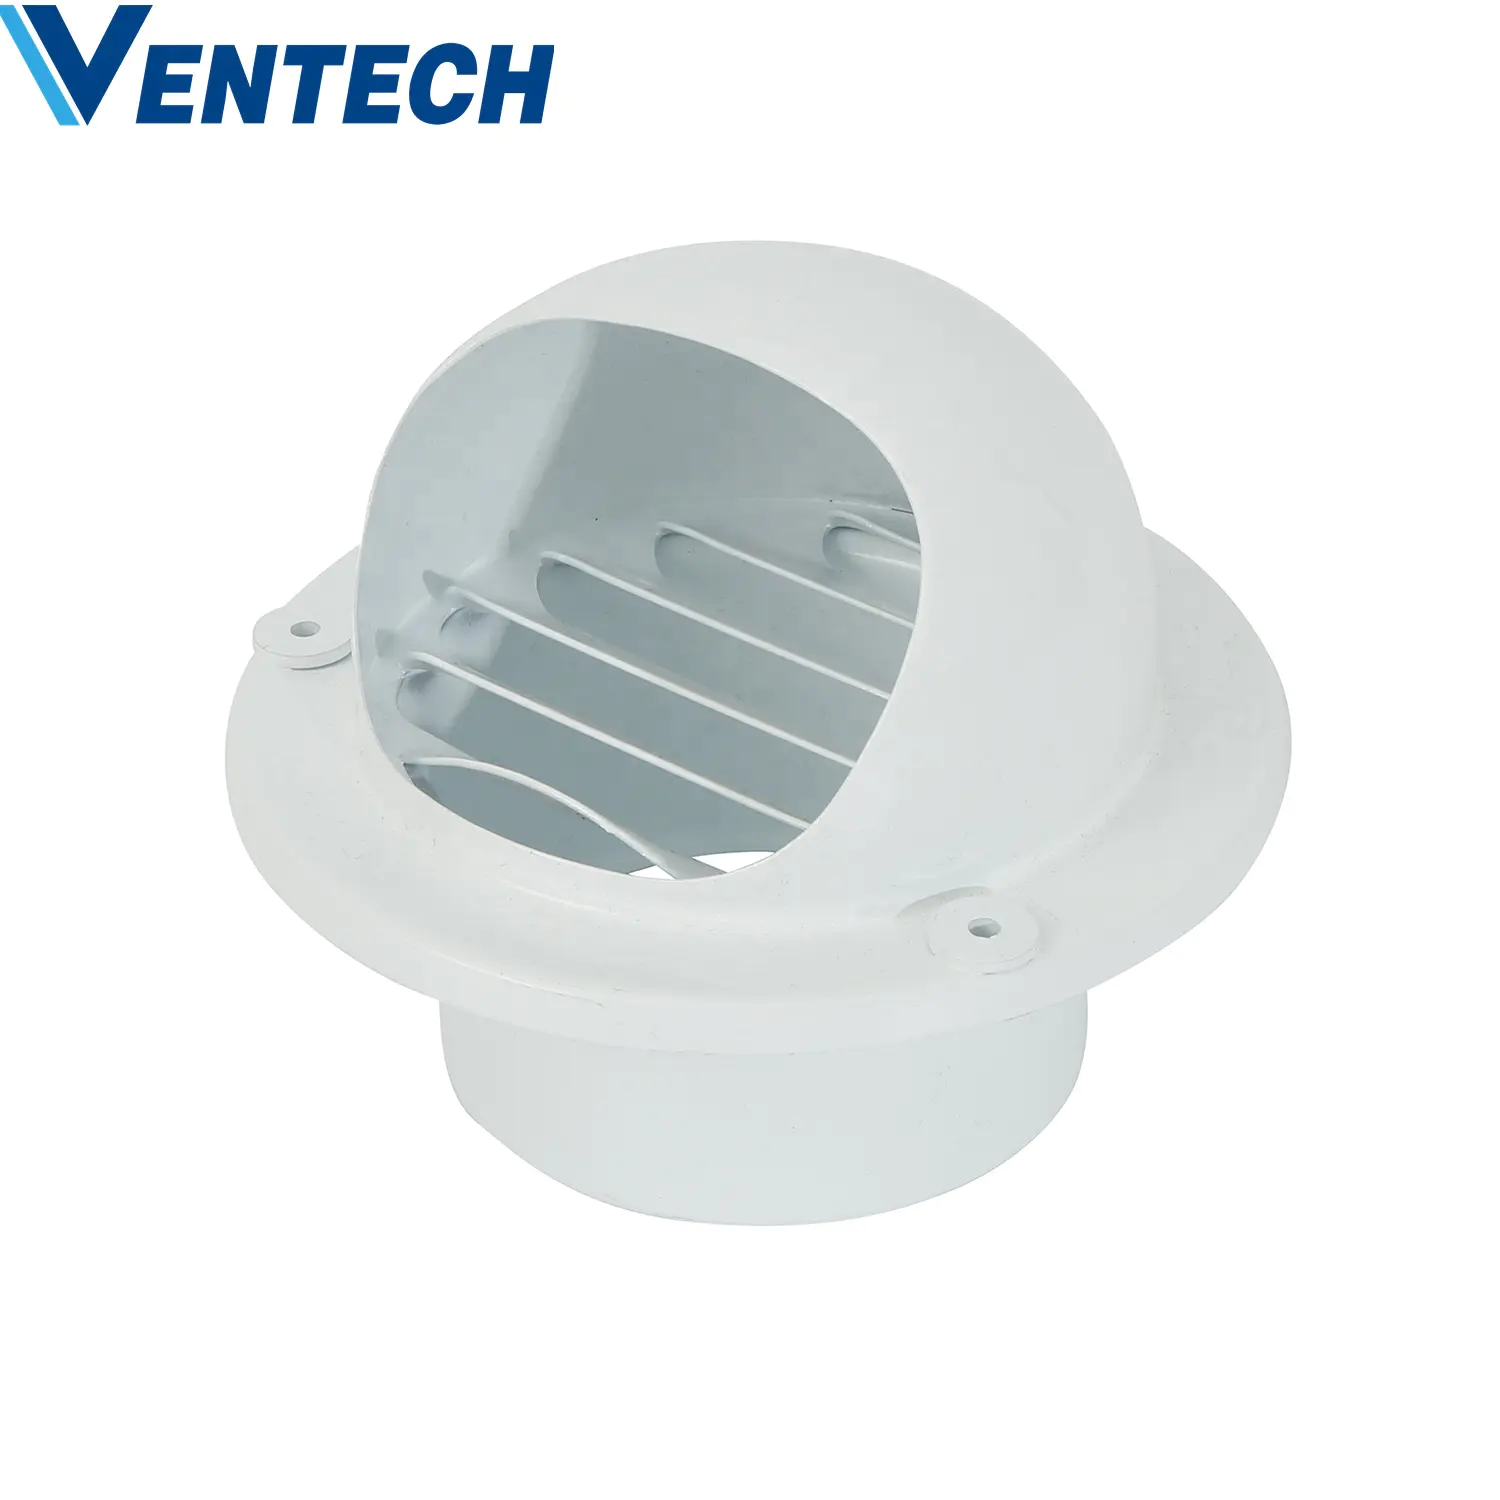 VENTECH HVAC Ventilation Aluminum Exhaust Air Conditioner Vent Cover Ball Stainless Steel Weather Louvers For Air Conditioners